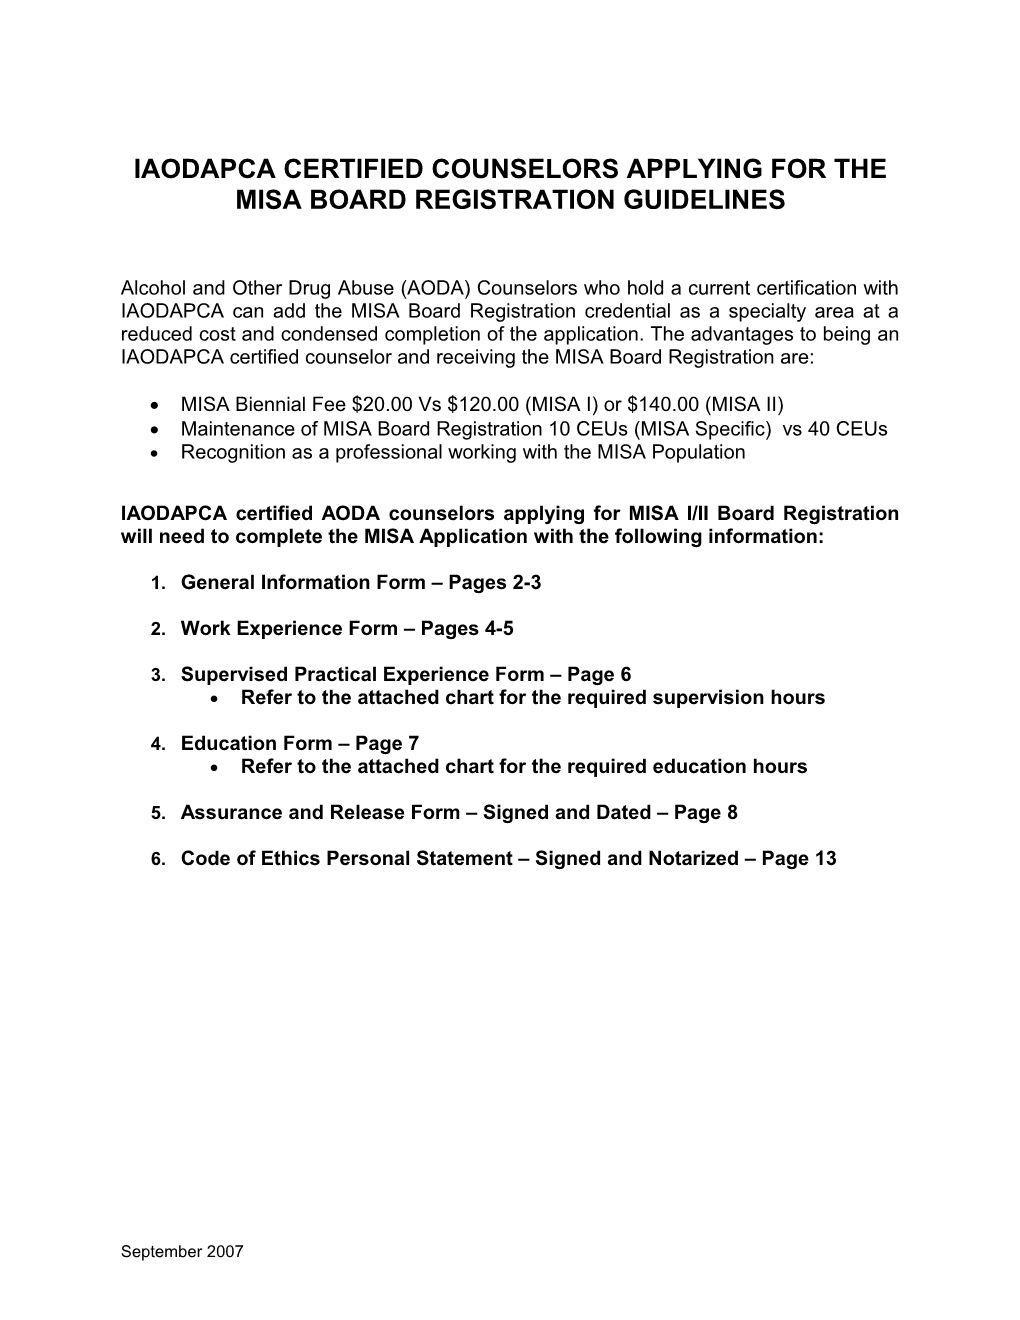 Iaodapca Certified Counselors Applying for the Misa Board Registration Guidelines